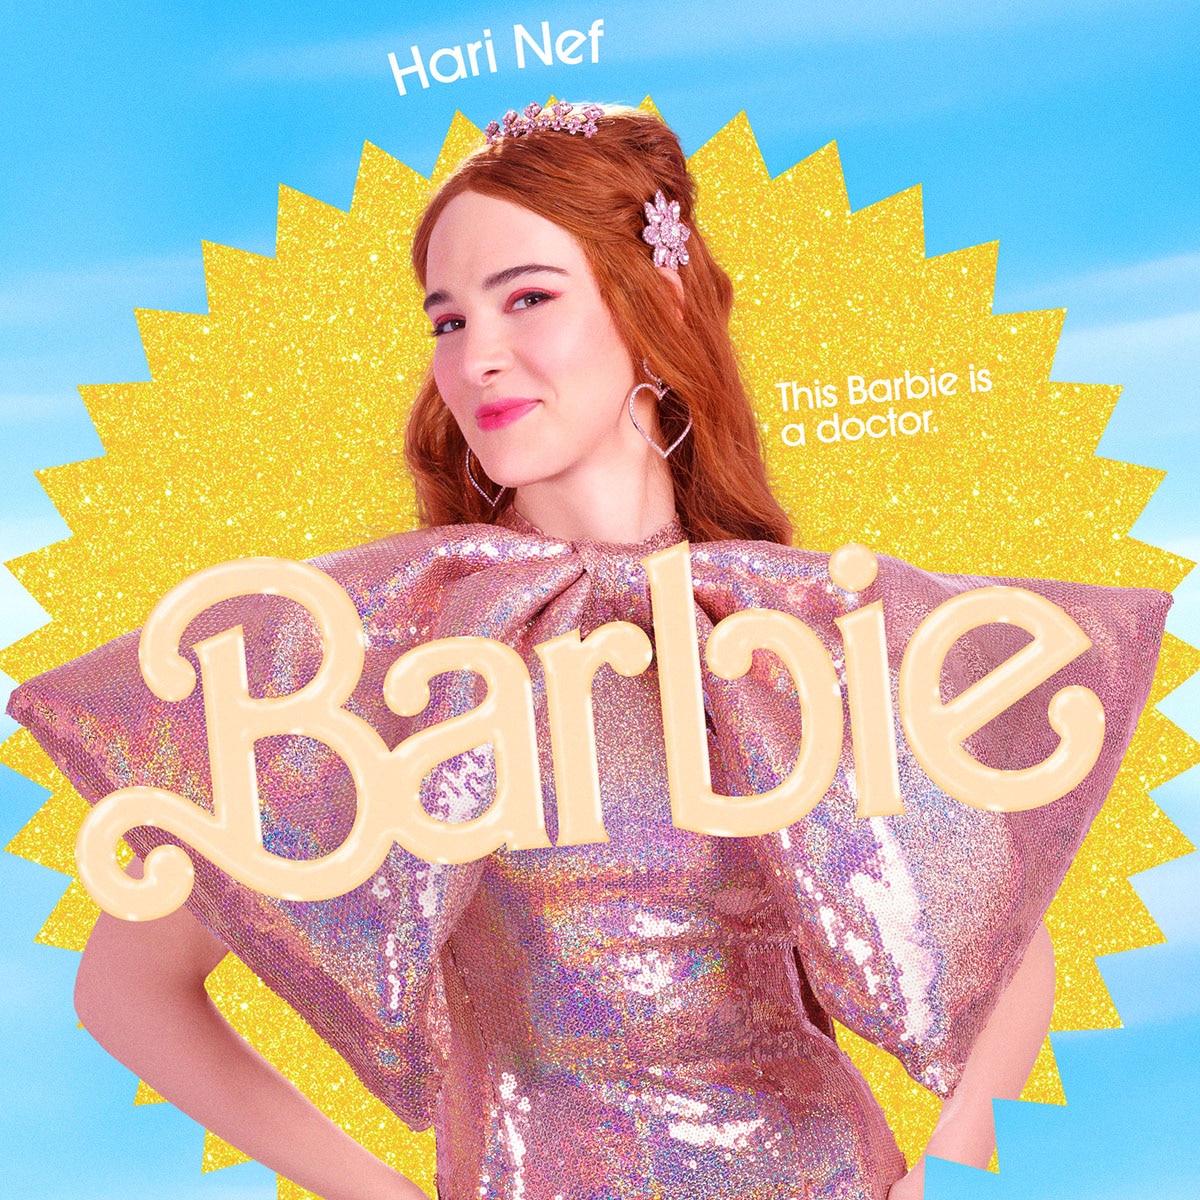 Hari Nef Shares How Barbie Film Schedule Was Adjusted for Her